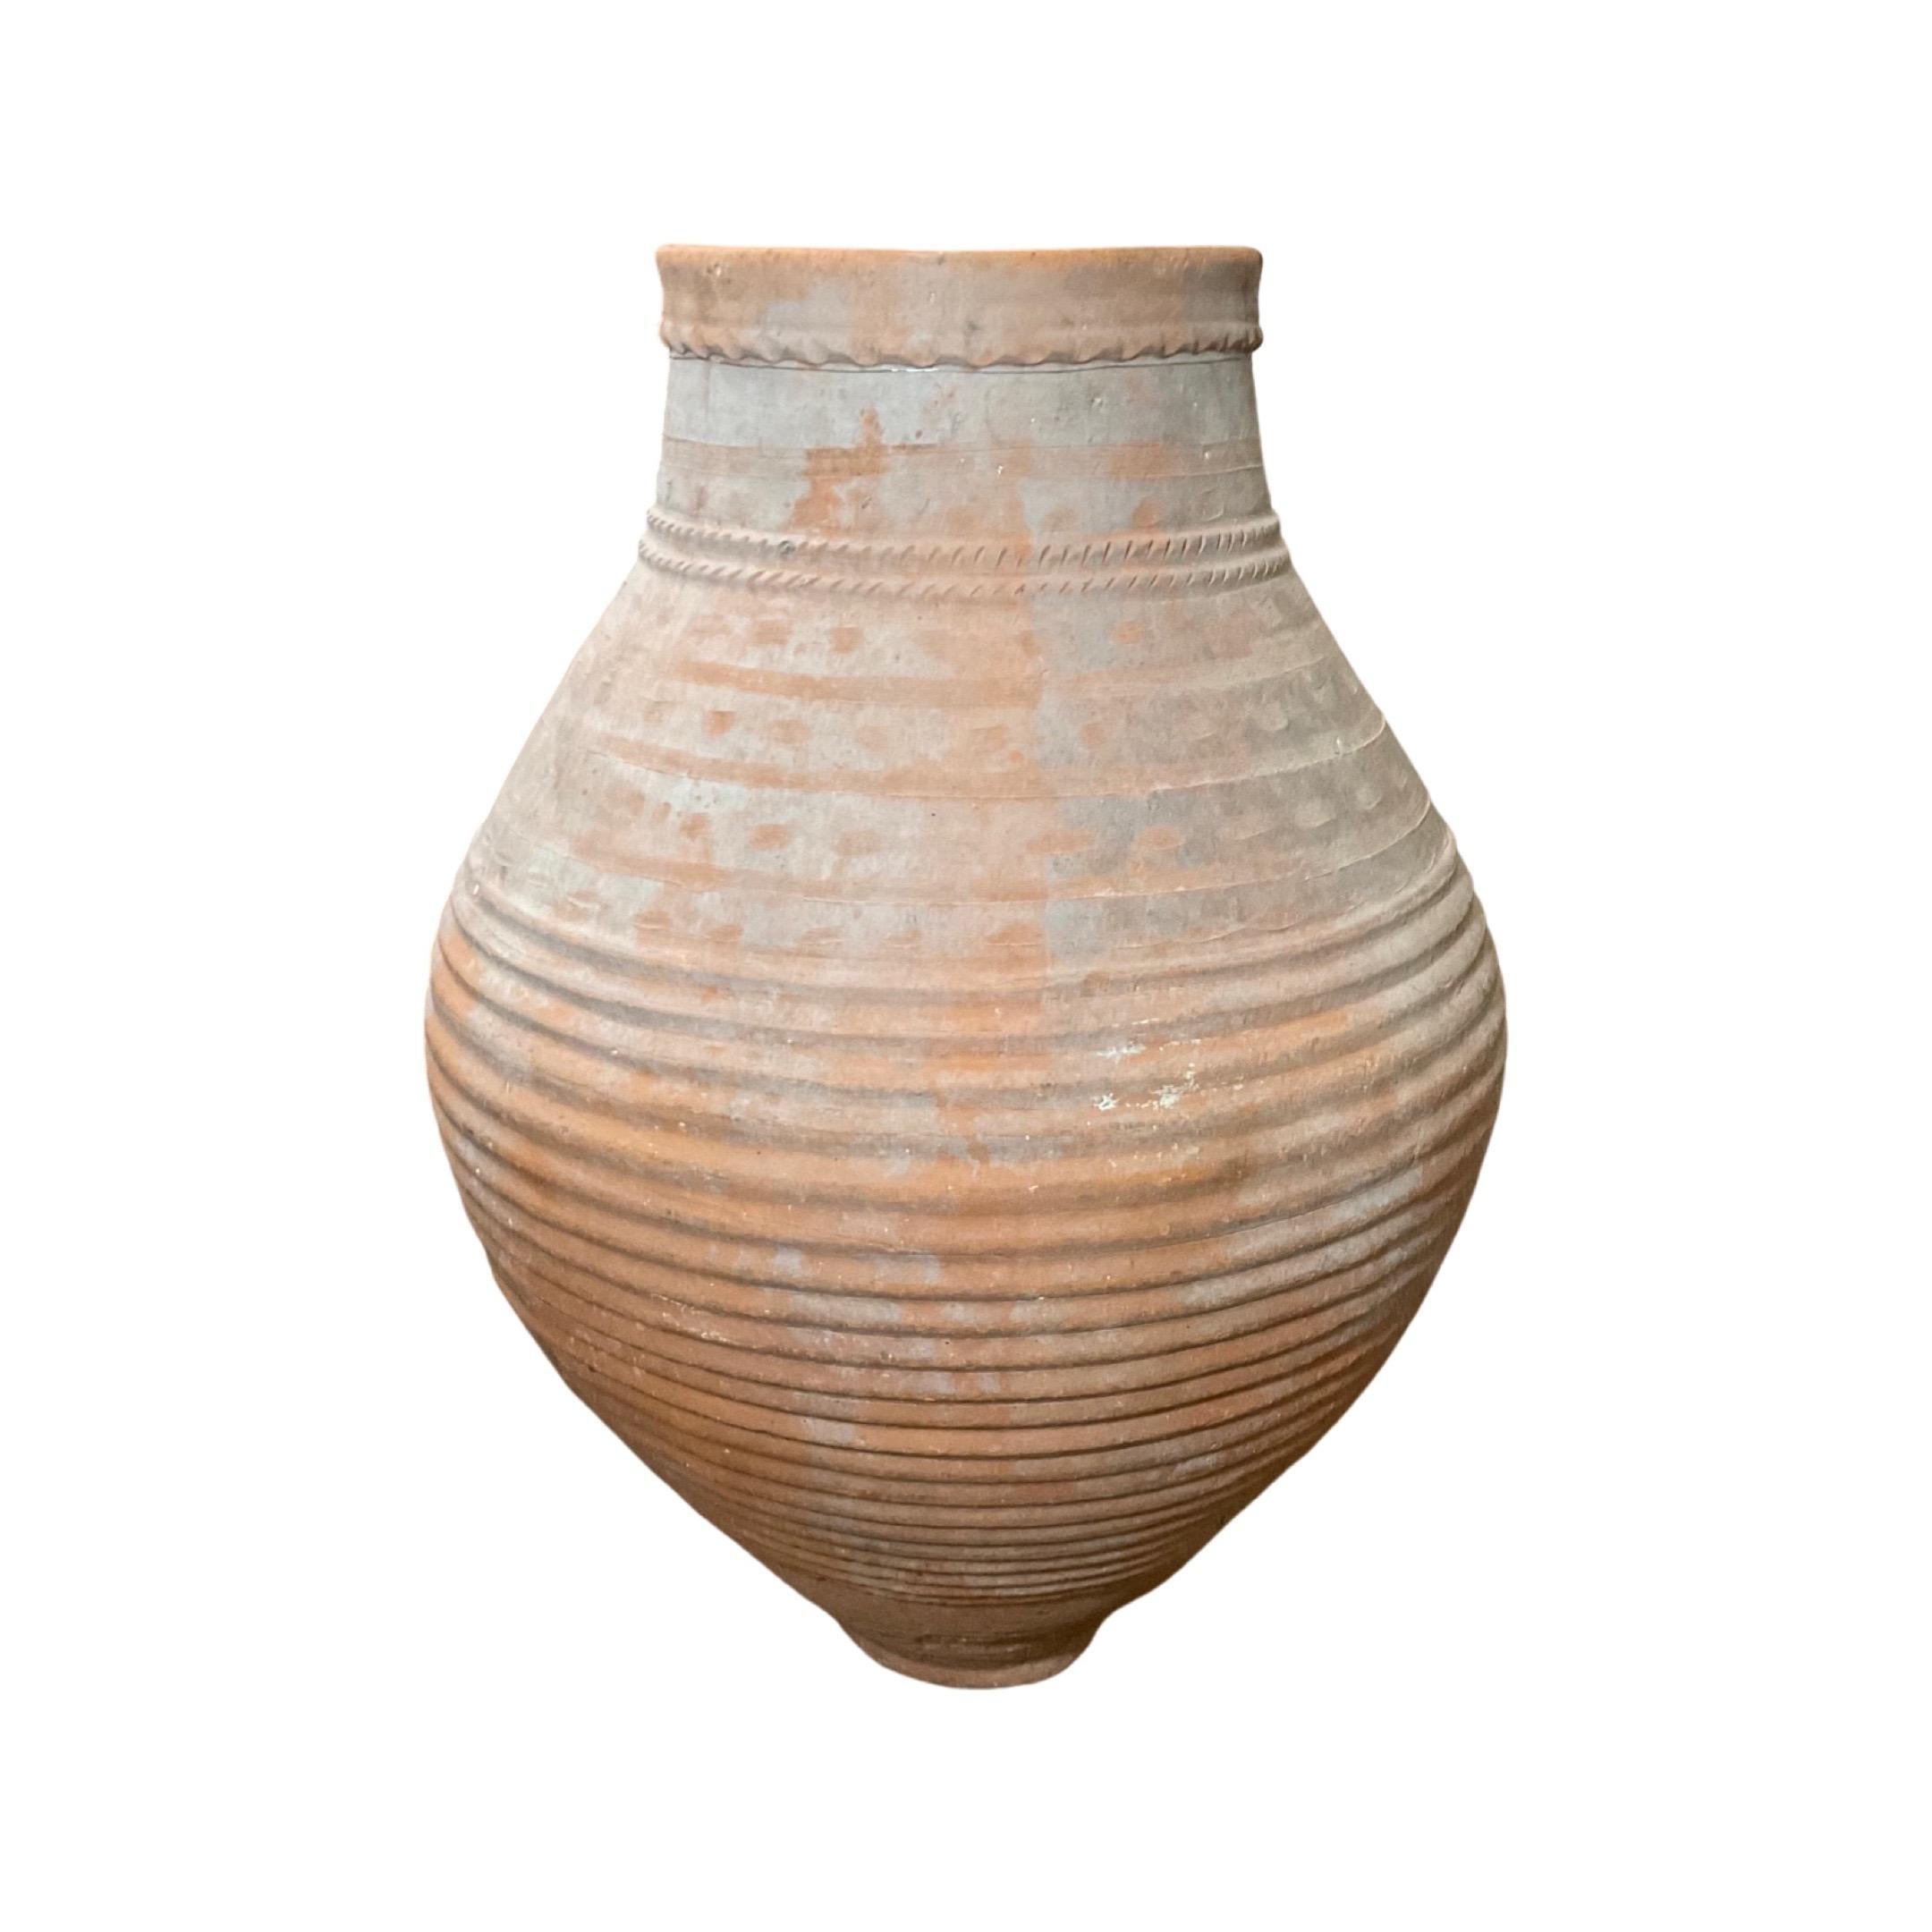 This traditional Greek terracotta planter is composed of natural clay and fired at intense temperatures to generate a robust, frost-resistant construction that can be exposed to exterior conditions for extended periods. Boasting an 18th century